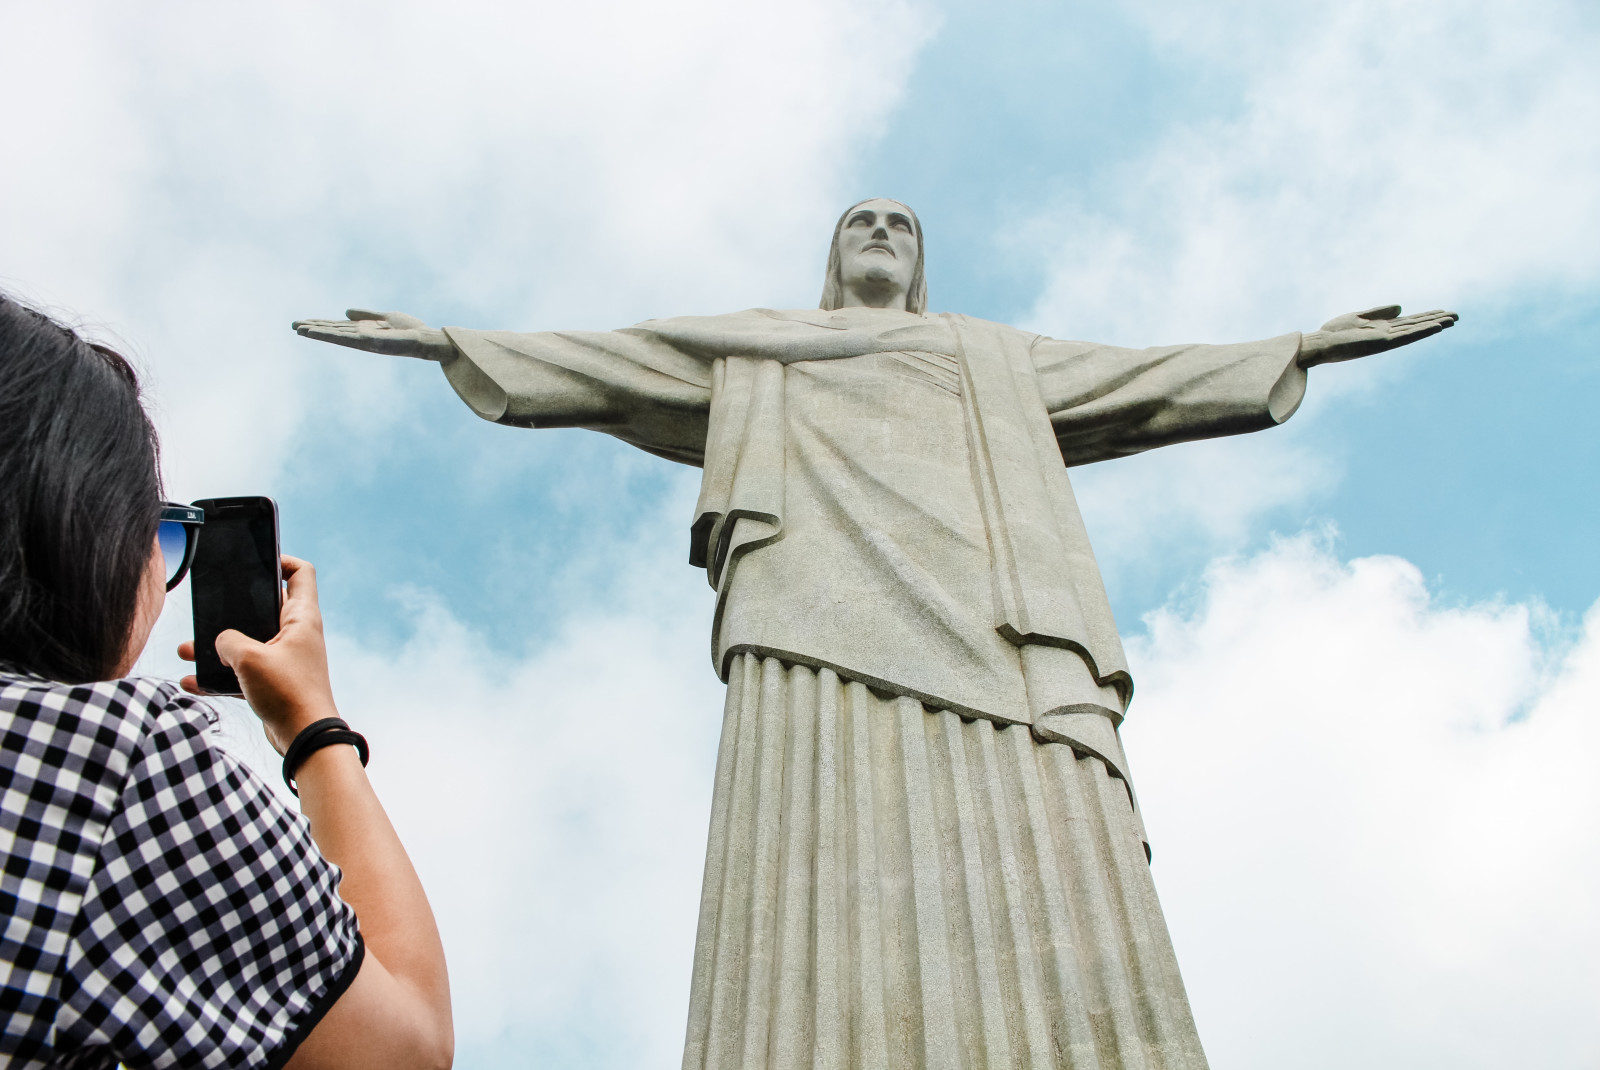 The white marbled Christ the Redeemer statue in Rio De Janeiro, Brazil with a woman in black and white checkered clothing taking a picture with an iPhone.